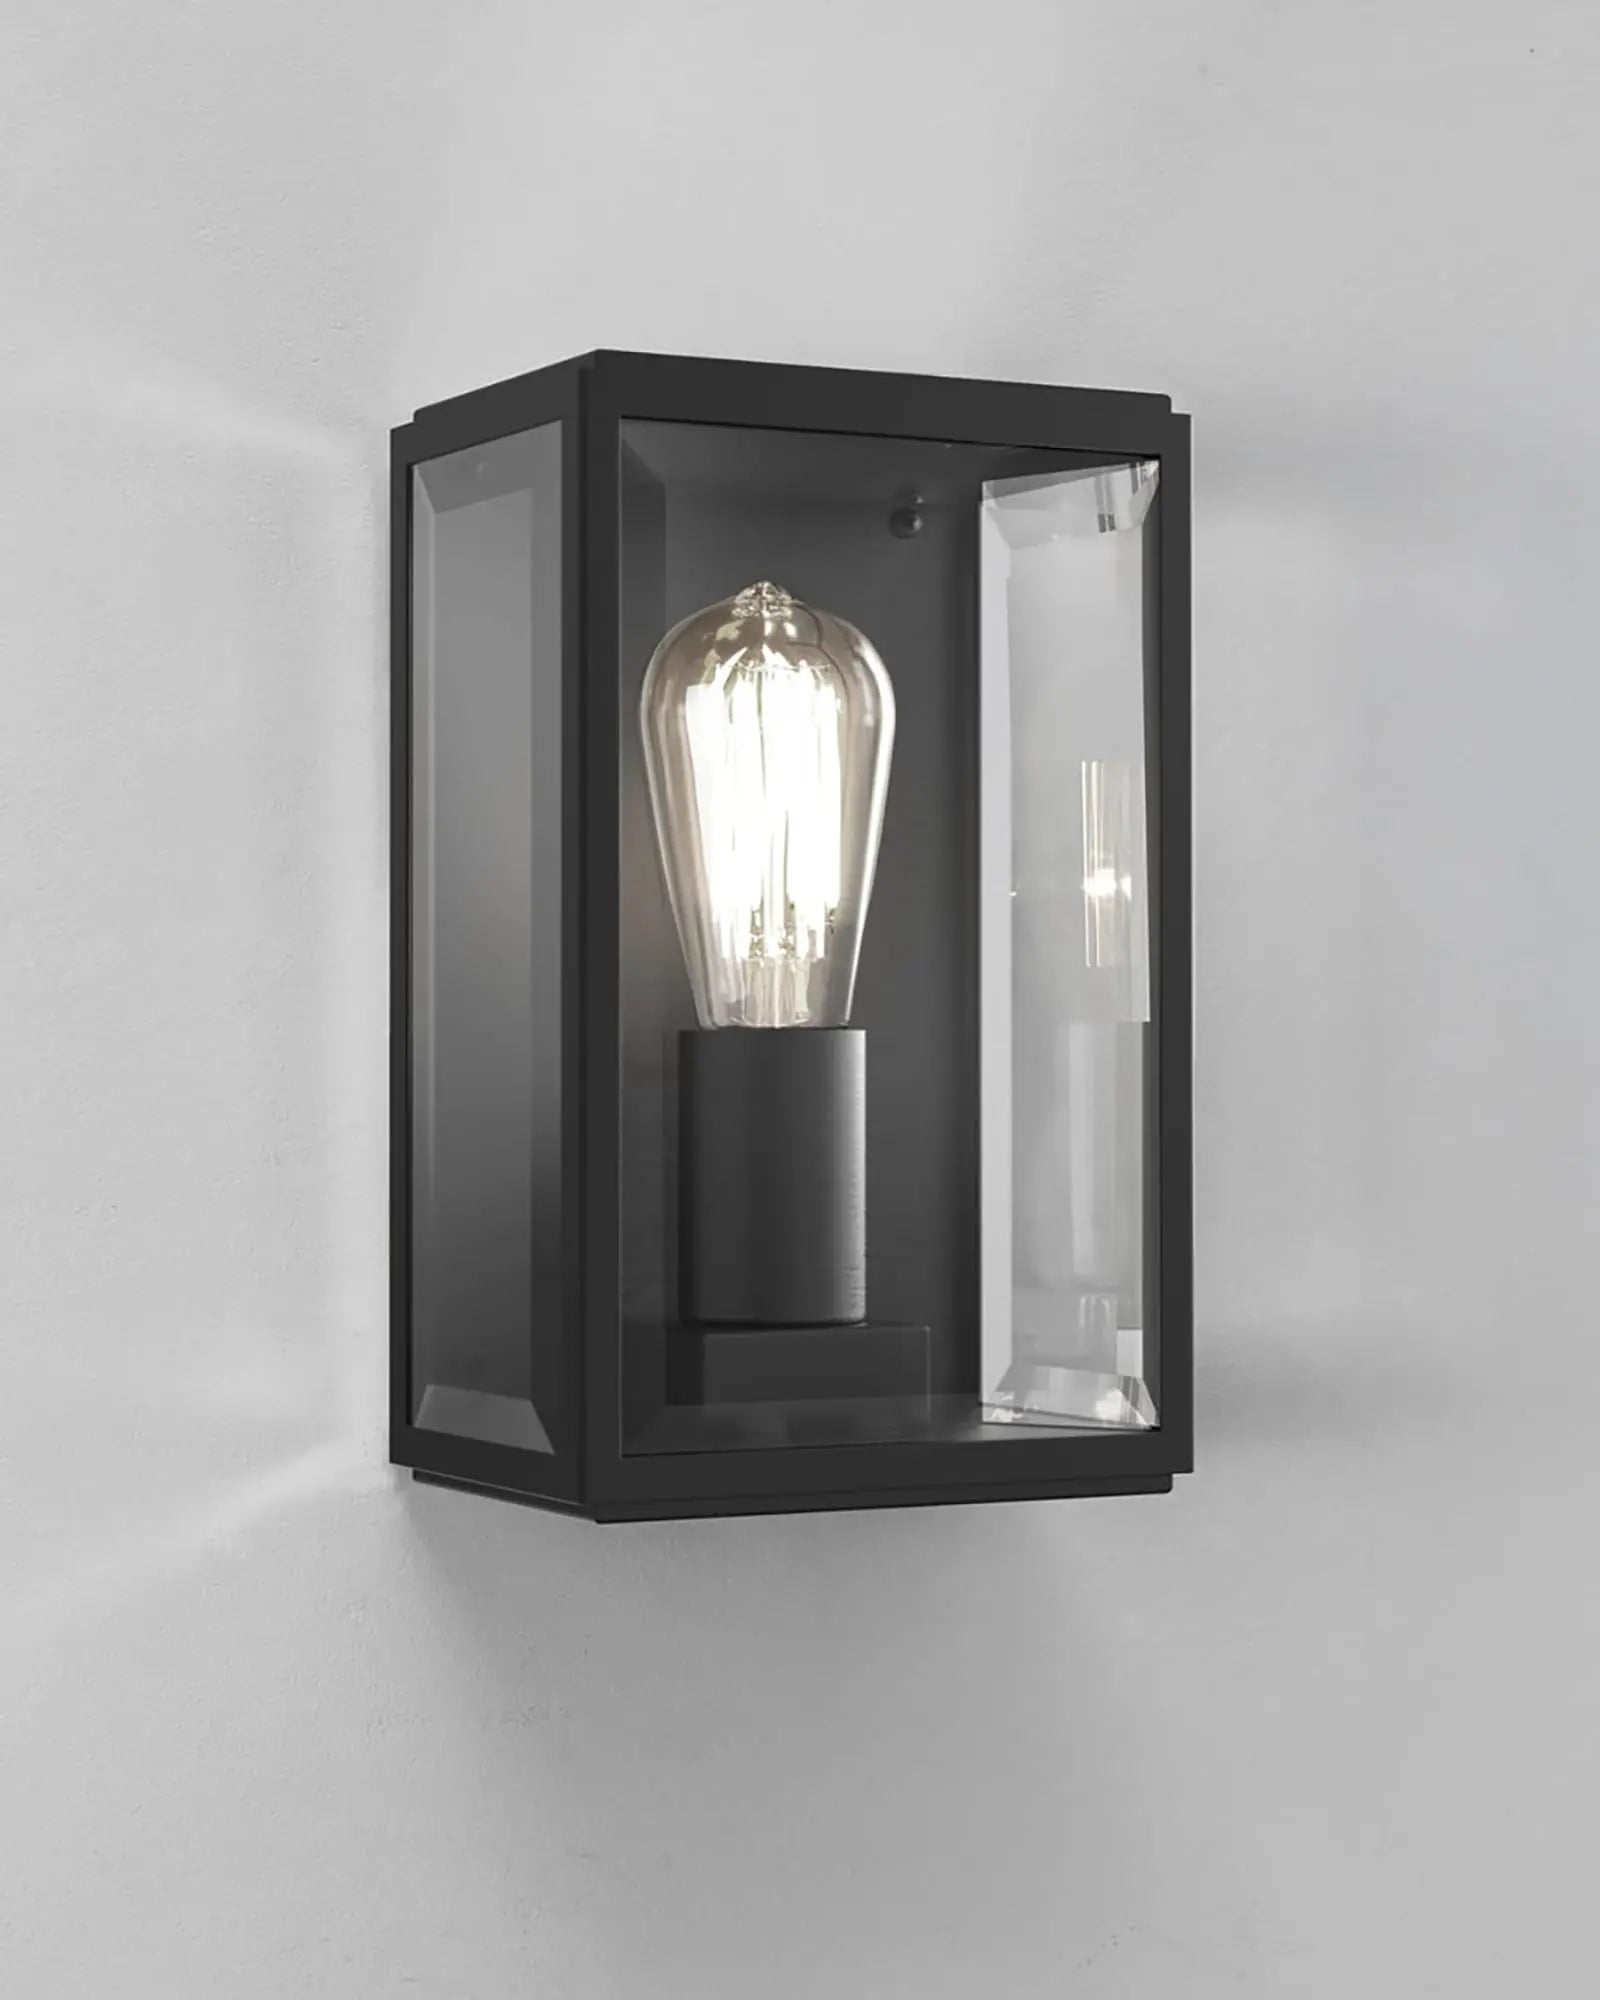 Homefield contemporary lantern style outdoor wall light black 160